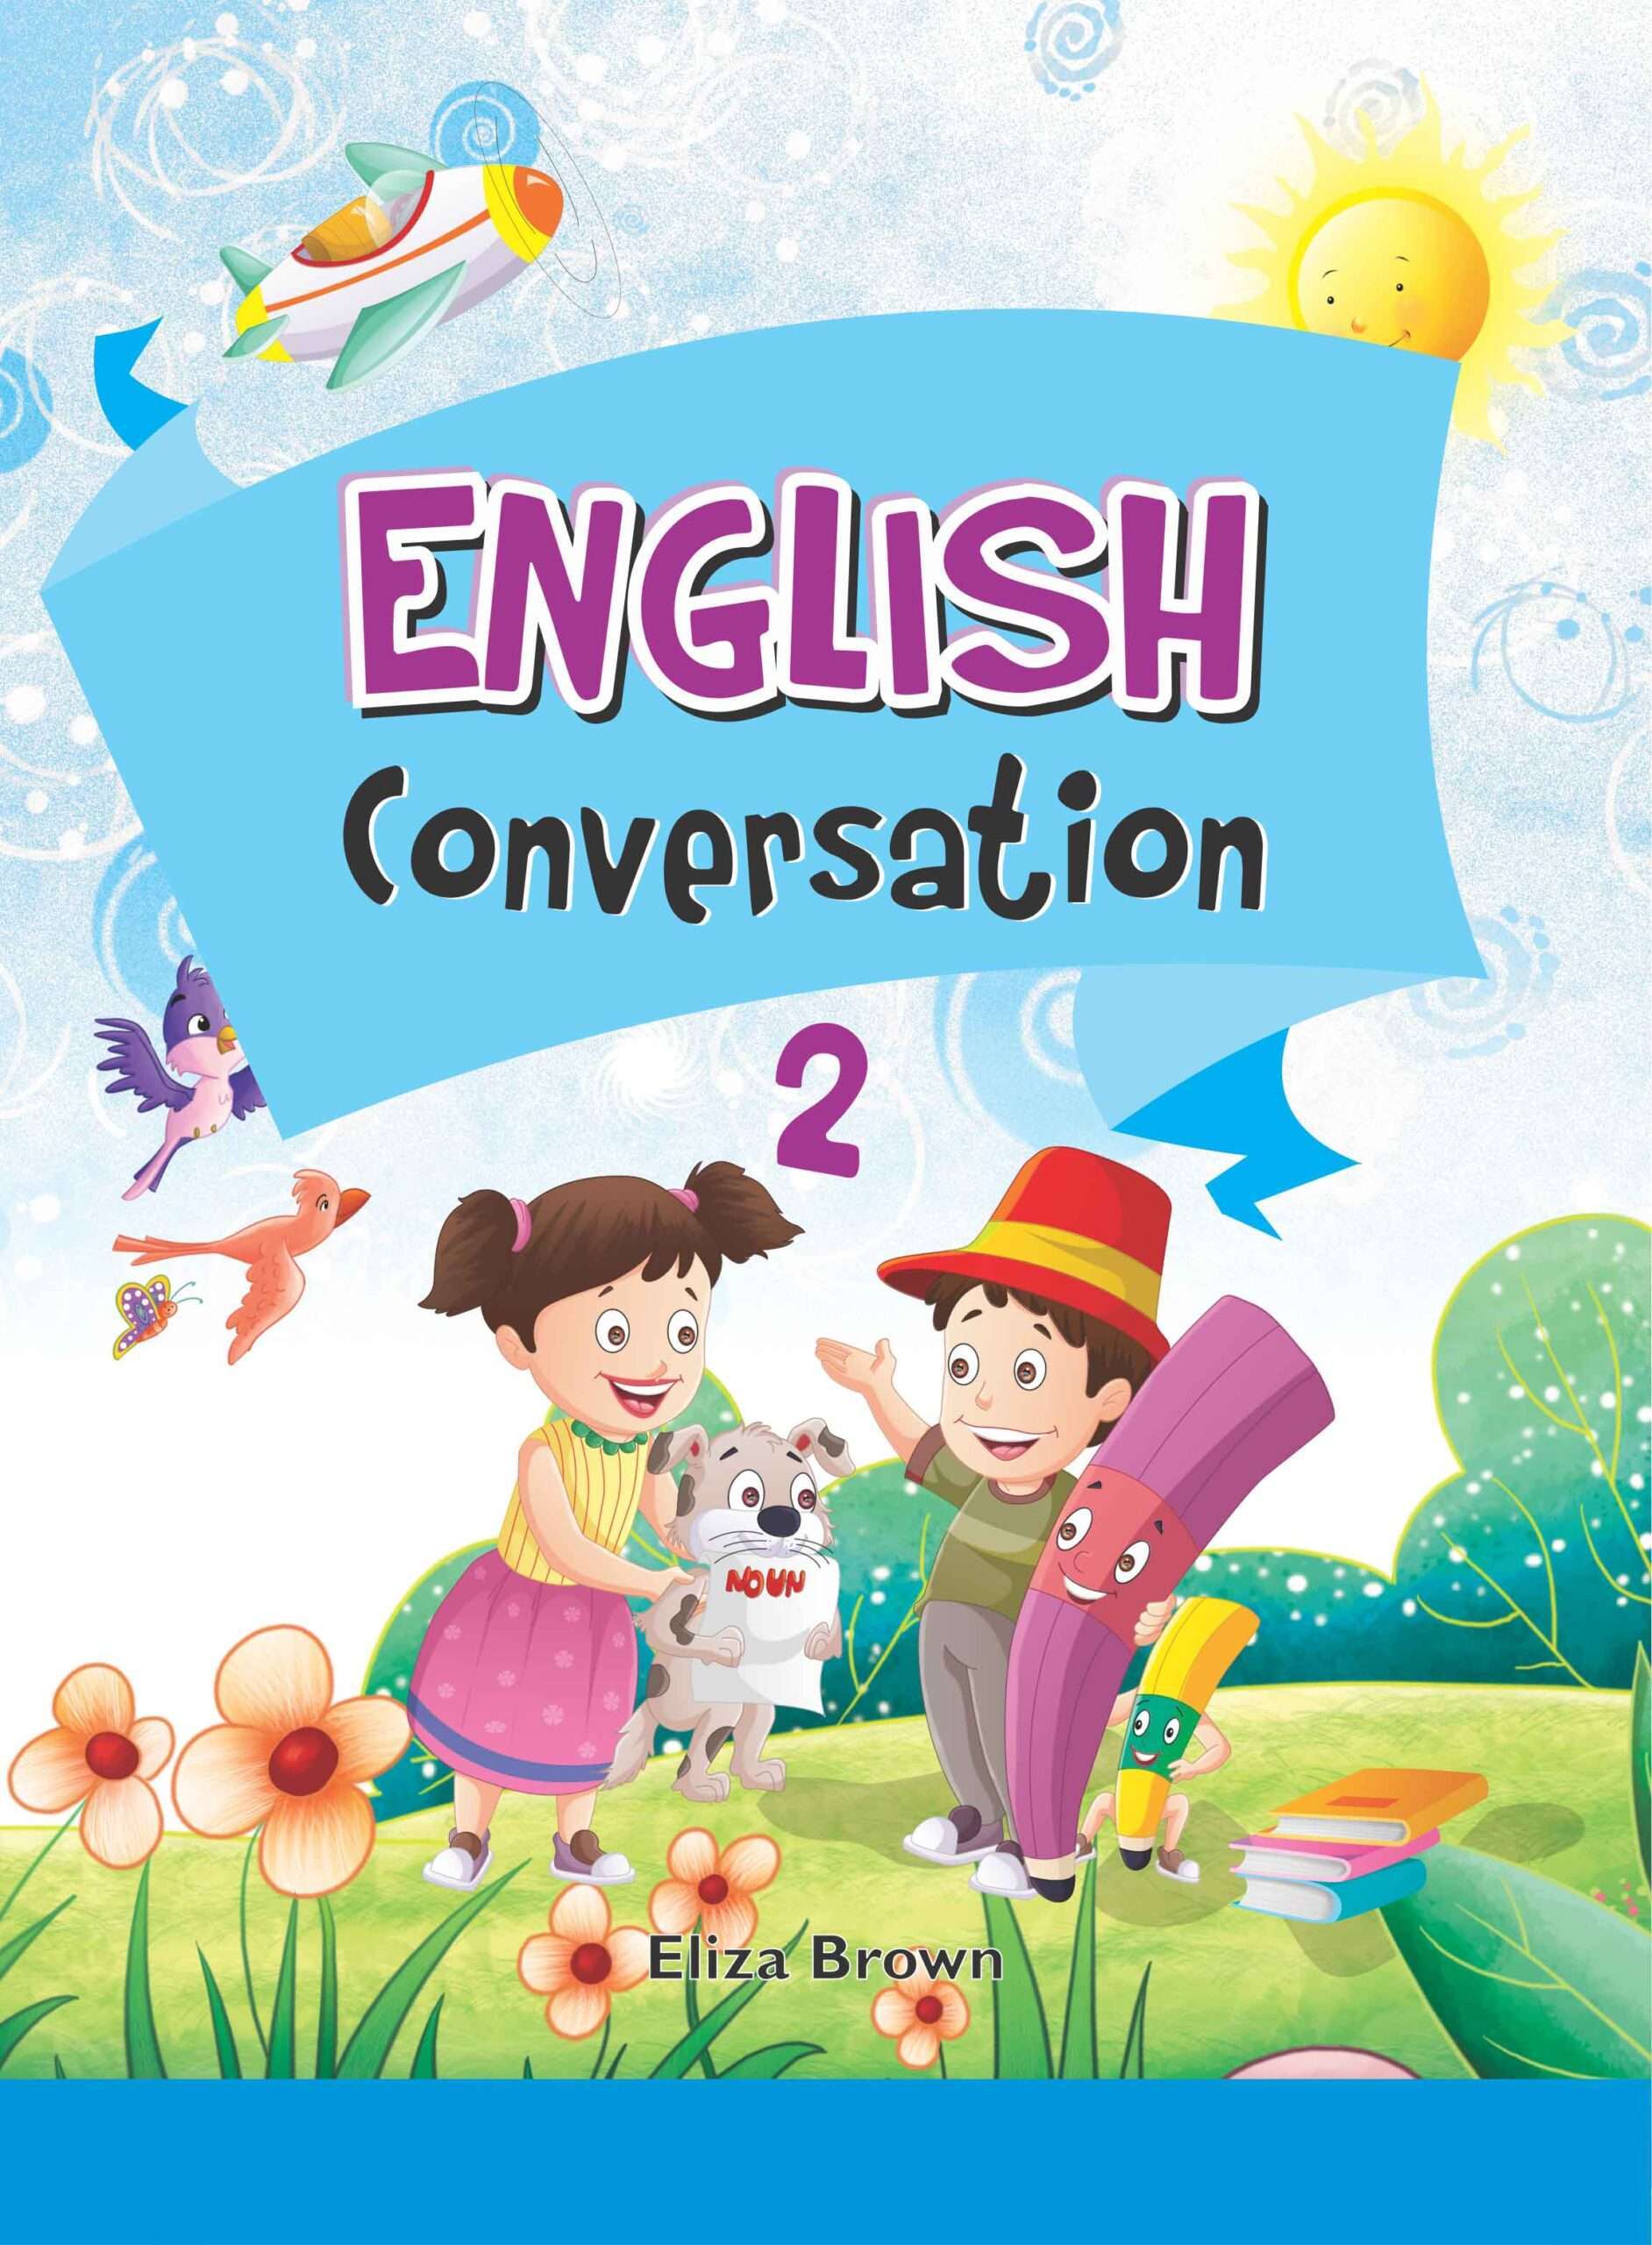 Buy English Conversation for 2